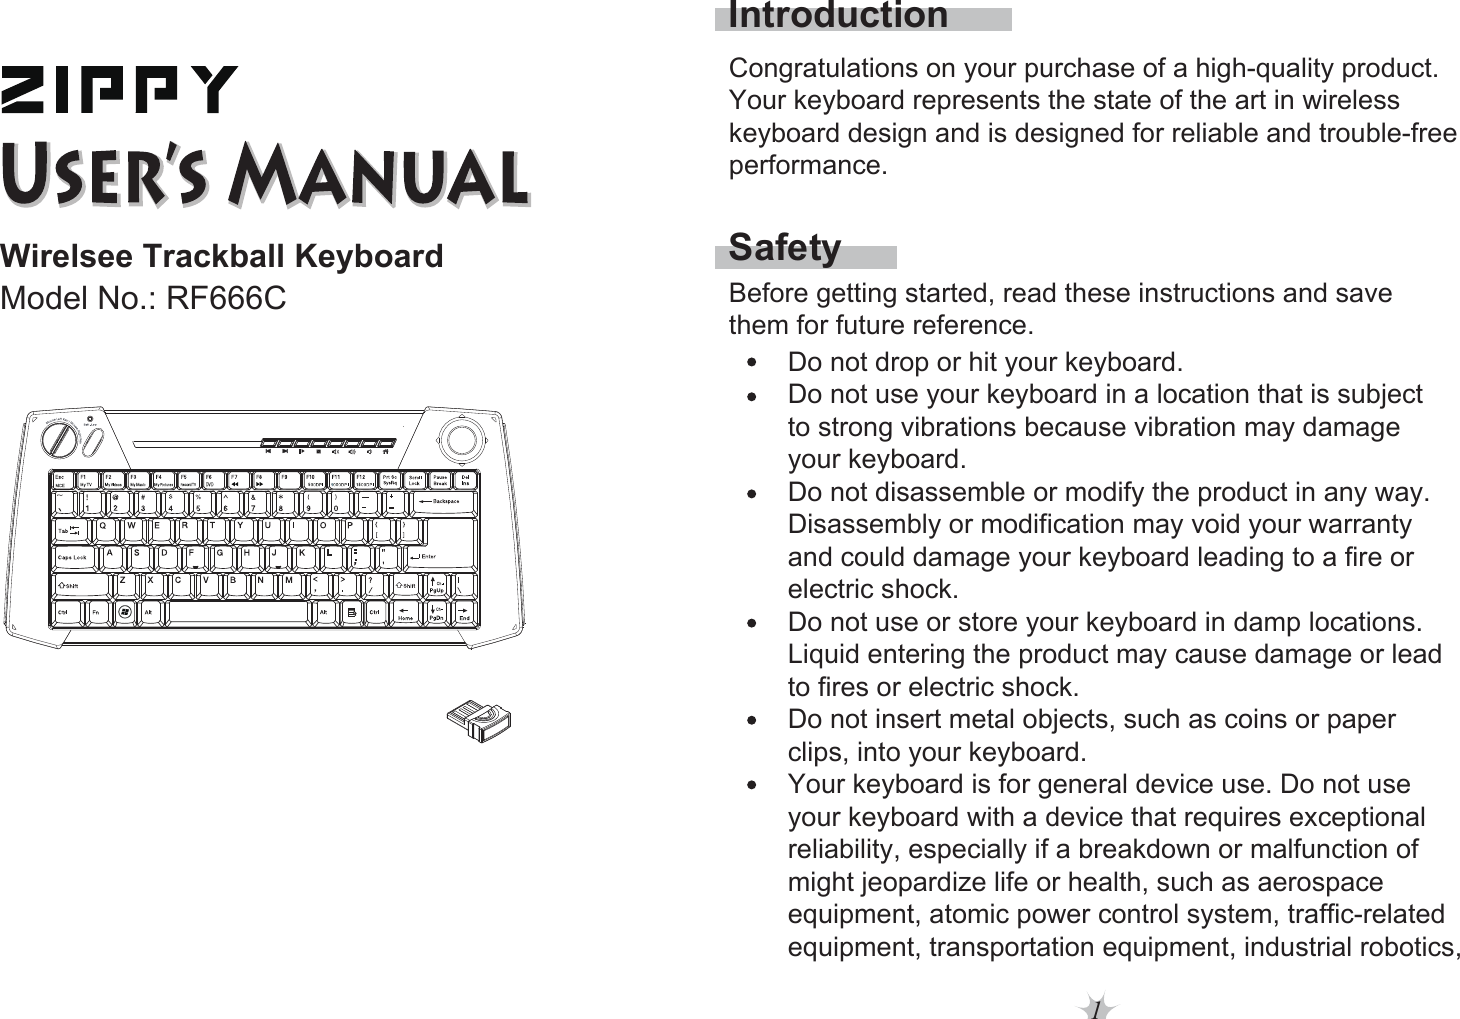 1Wirelsee Trackball KeyboardModel No.: RF666CSafetyIntroductionBefore getting started, read these instructions and save them for future reference.Do not drop or hit your keyboard. Do not use your keyboard in a location that is subject to strong vibrations because vibration may damage your keyboard. Do not disassemble or modify the product in any way. Disassembly or modification may void your warranty and could damage your keyboard leading to a fire or electric shock. Do not use or store your keyboard in damp locations.Liquid entering the product may cause damage or lead to fires or electric shock. Do not insert metal objects, such as coins or paper clips, into your keyboard. Your keyboard is for general device use. Do not use your keyboard with a device that requires exceptional reliability, especially if a breakdown or malfunction of might jeopardize life or health, such as aerospace equipment, atomic power control system, traffic-relatedequipment, transportation equipment, industrial robotics,Congratulations on your purchase of a high-quality product. Your keyboard represents the state of the art in wireless keyboard design and is designed for reliable and trouble-free performance. 